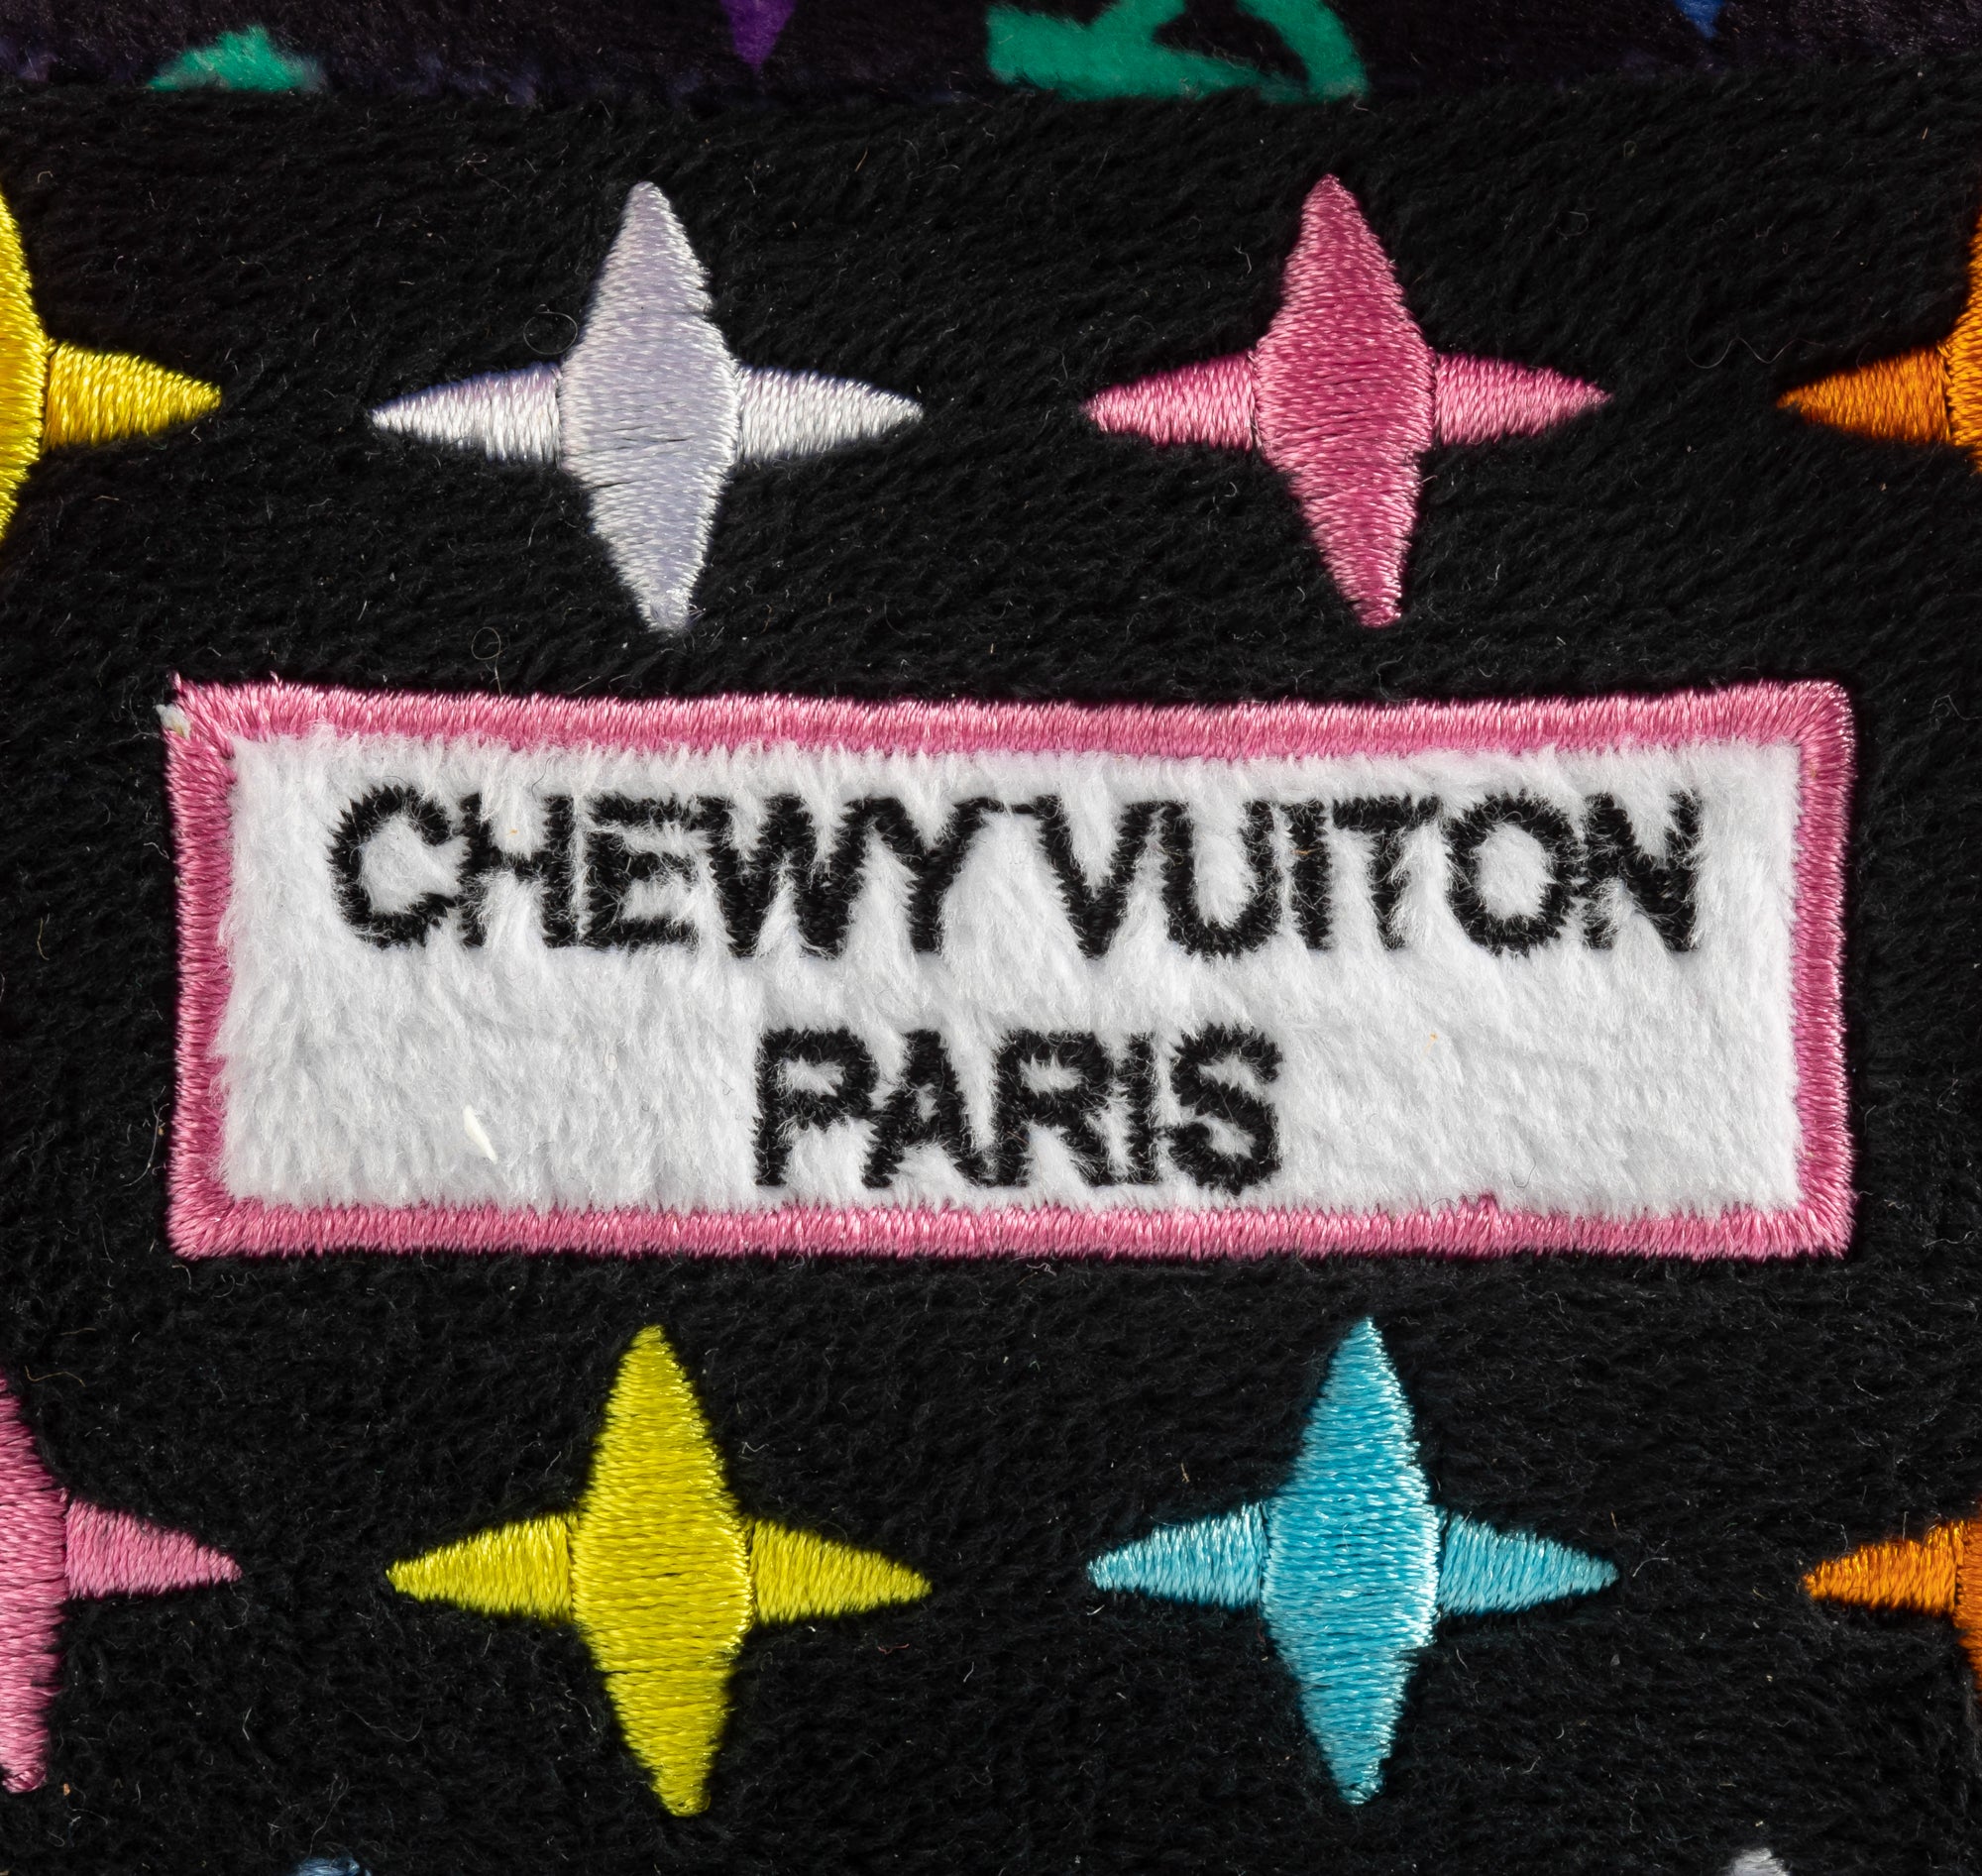 Chewy Vuiton Purse, Black Monogram Chewy Vuiton, Chewy Vuiton Handbag Toy,  Purse Dog Toy, Chewy Vuiton, Designer Dog Toy, Haute Diggity Dog Toy,  Handbag Dog Toy - Tails in the City